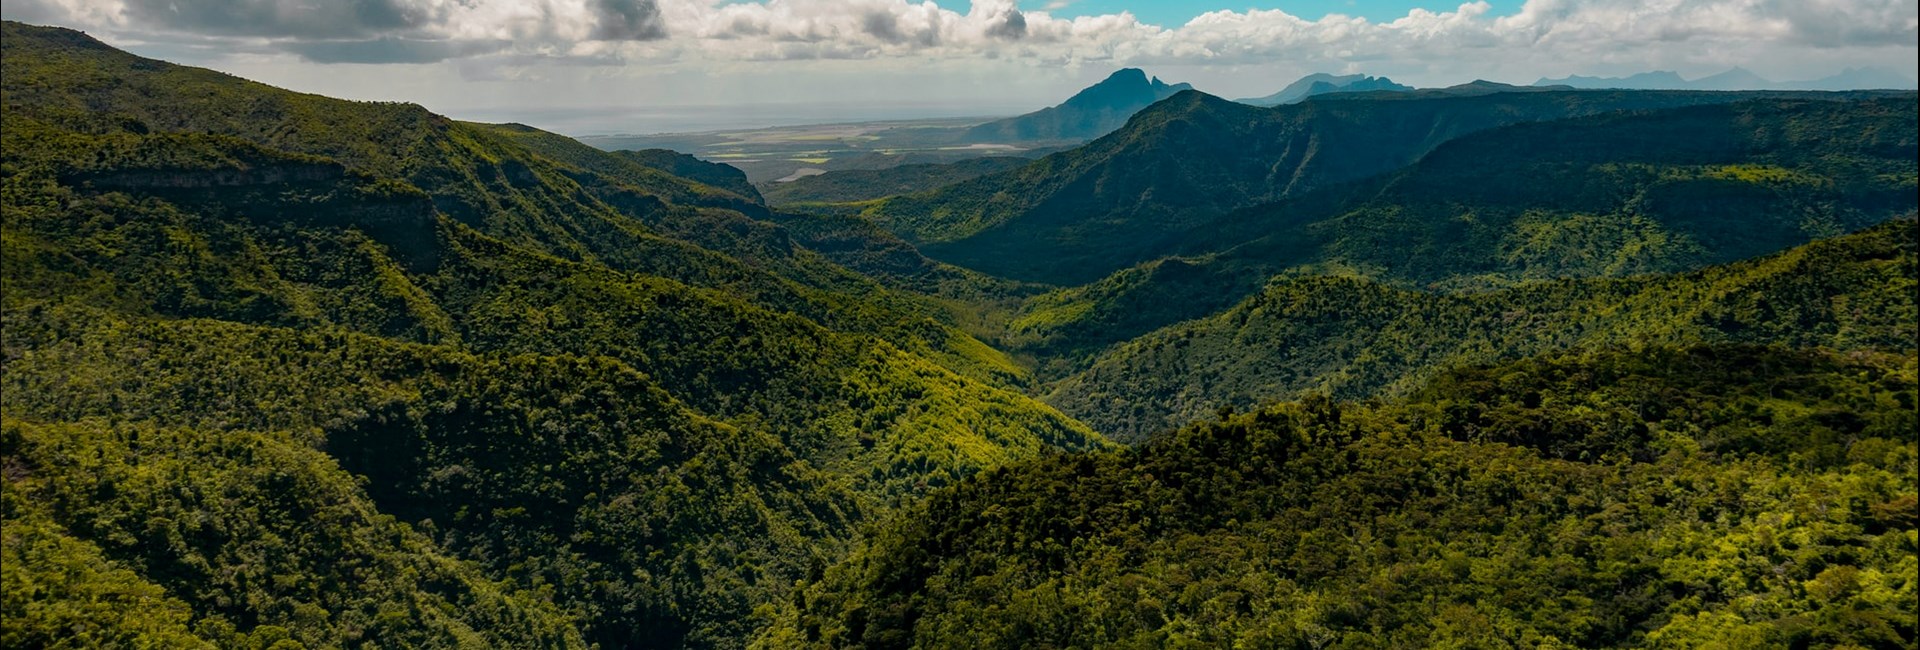 View Of Forests And Mountains